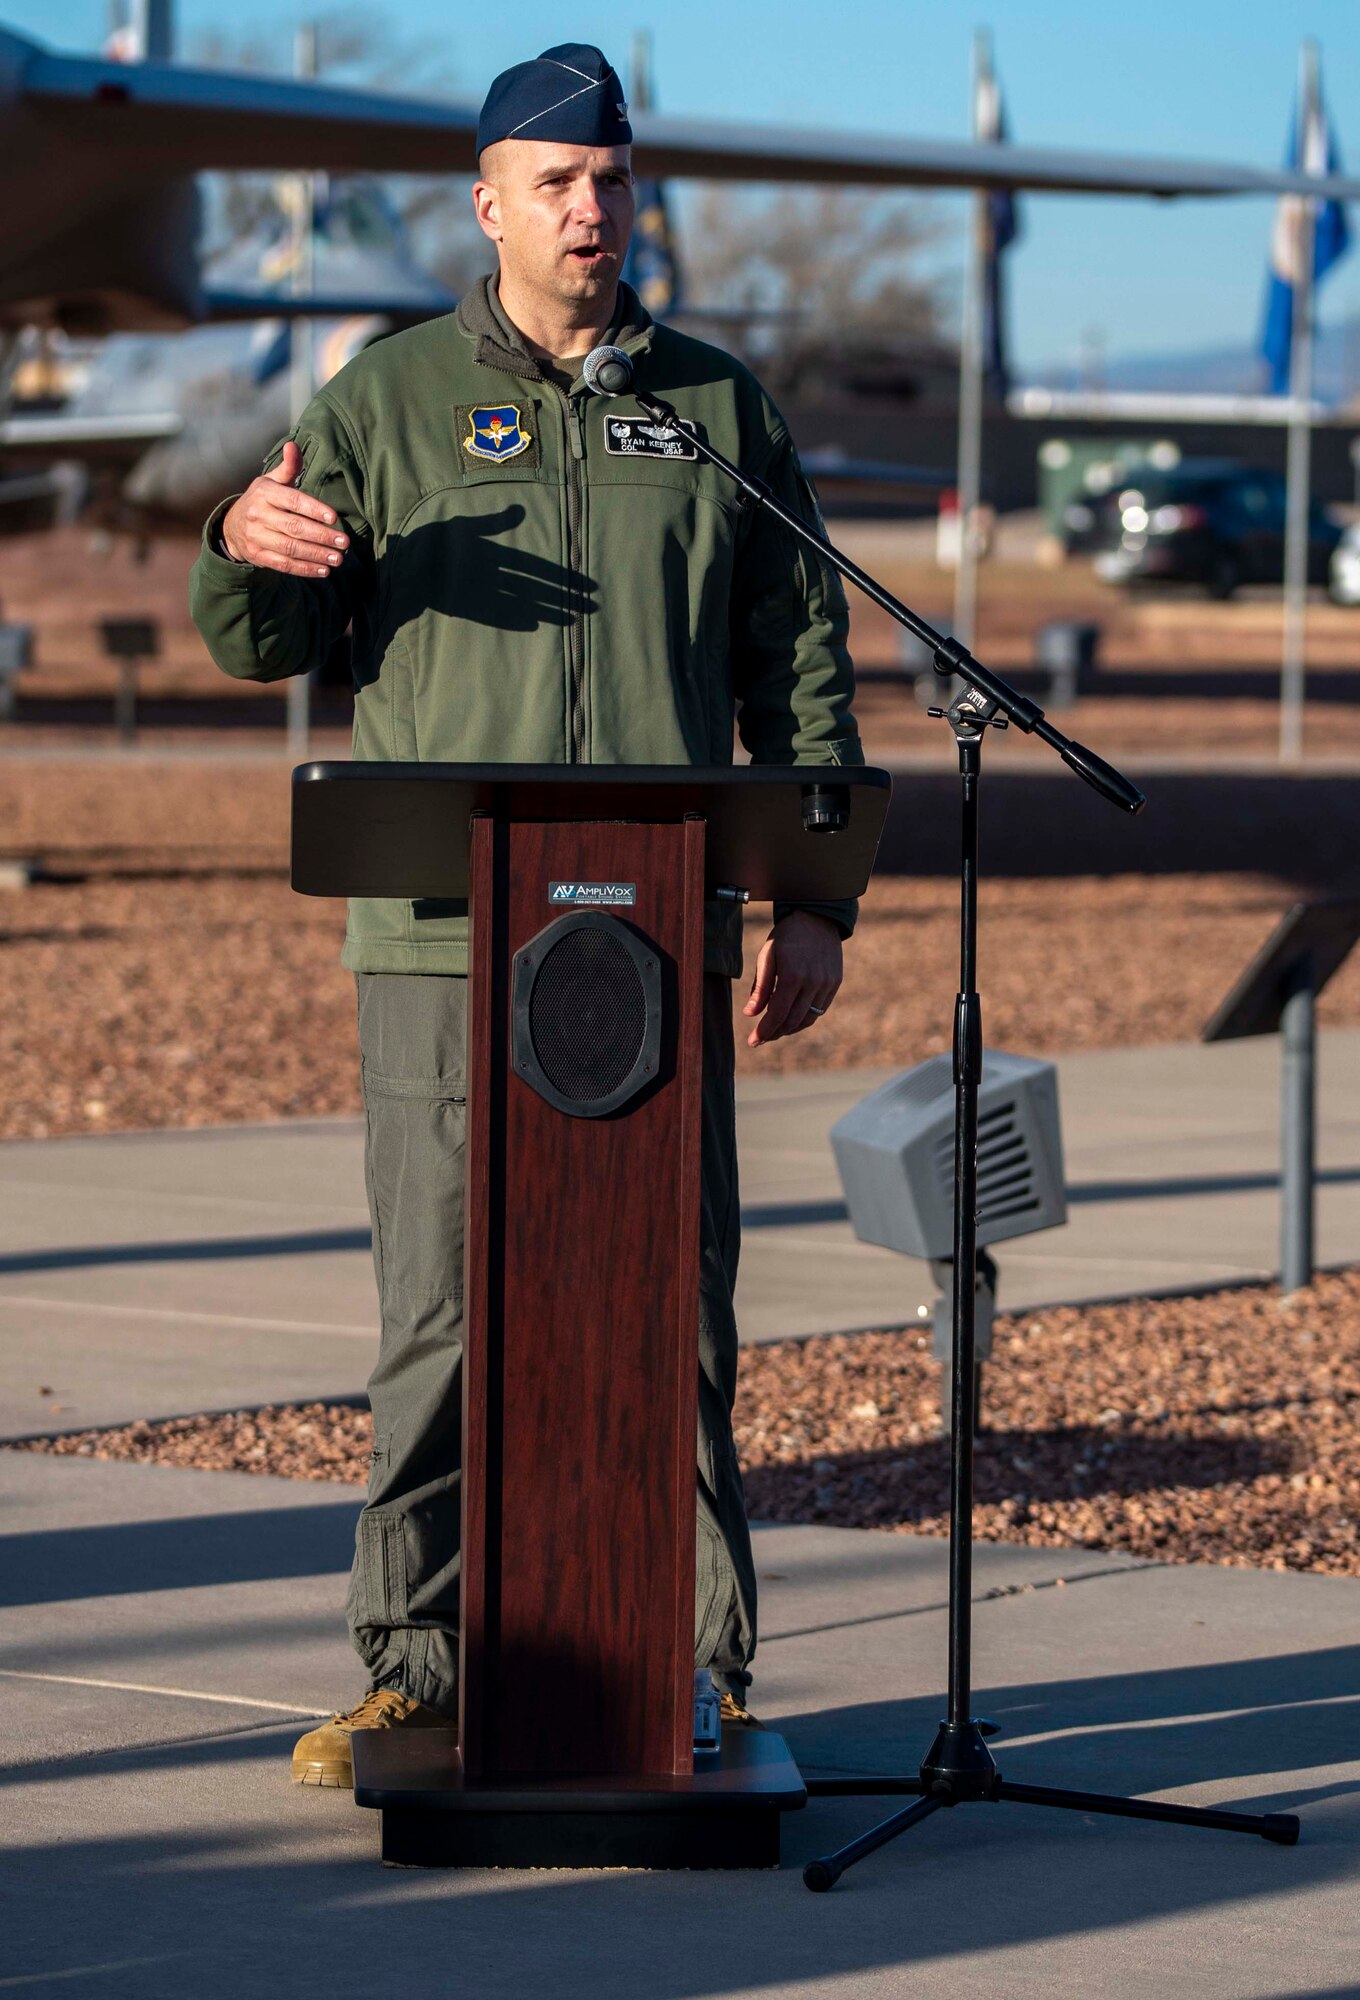 Col. Ryan Keeney, 49th Wing commander gives final remarks during the Operation Allies Welcome recognition ceremony, Jan. 26, 2022, on Holloman Air Force Base, New Mexico. Holloman was one of eight installations selected to temporarily house nearly 25,000 Afghan personnel as part of OAW. (U.S. Air Force photo by Staff Sgt. Christine Groening)